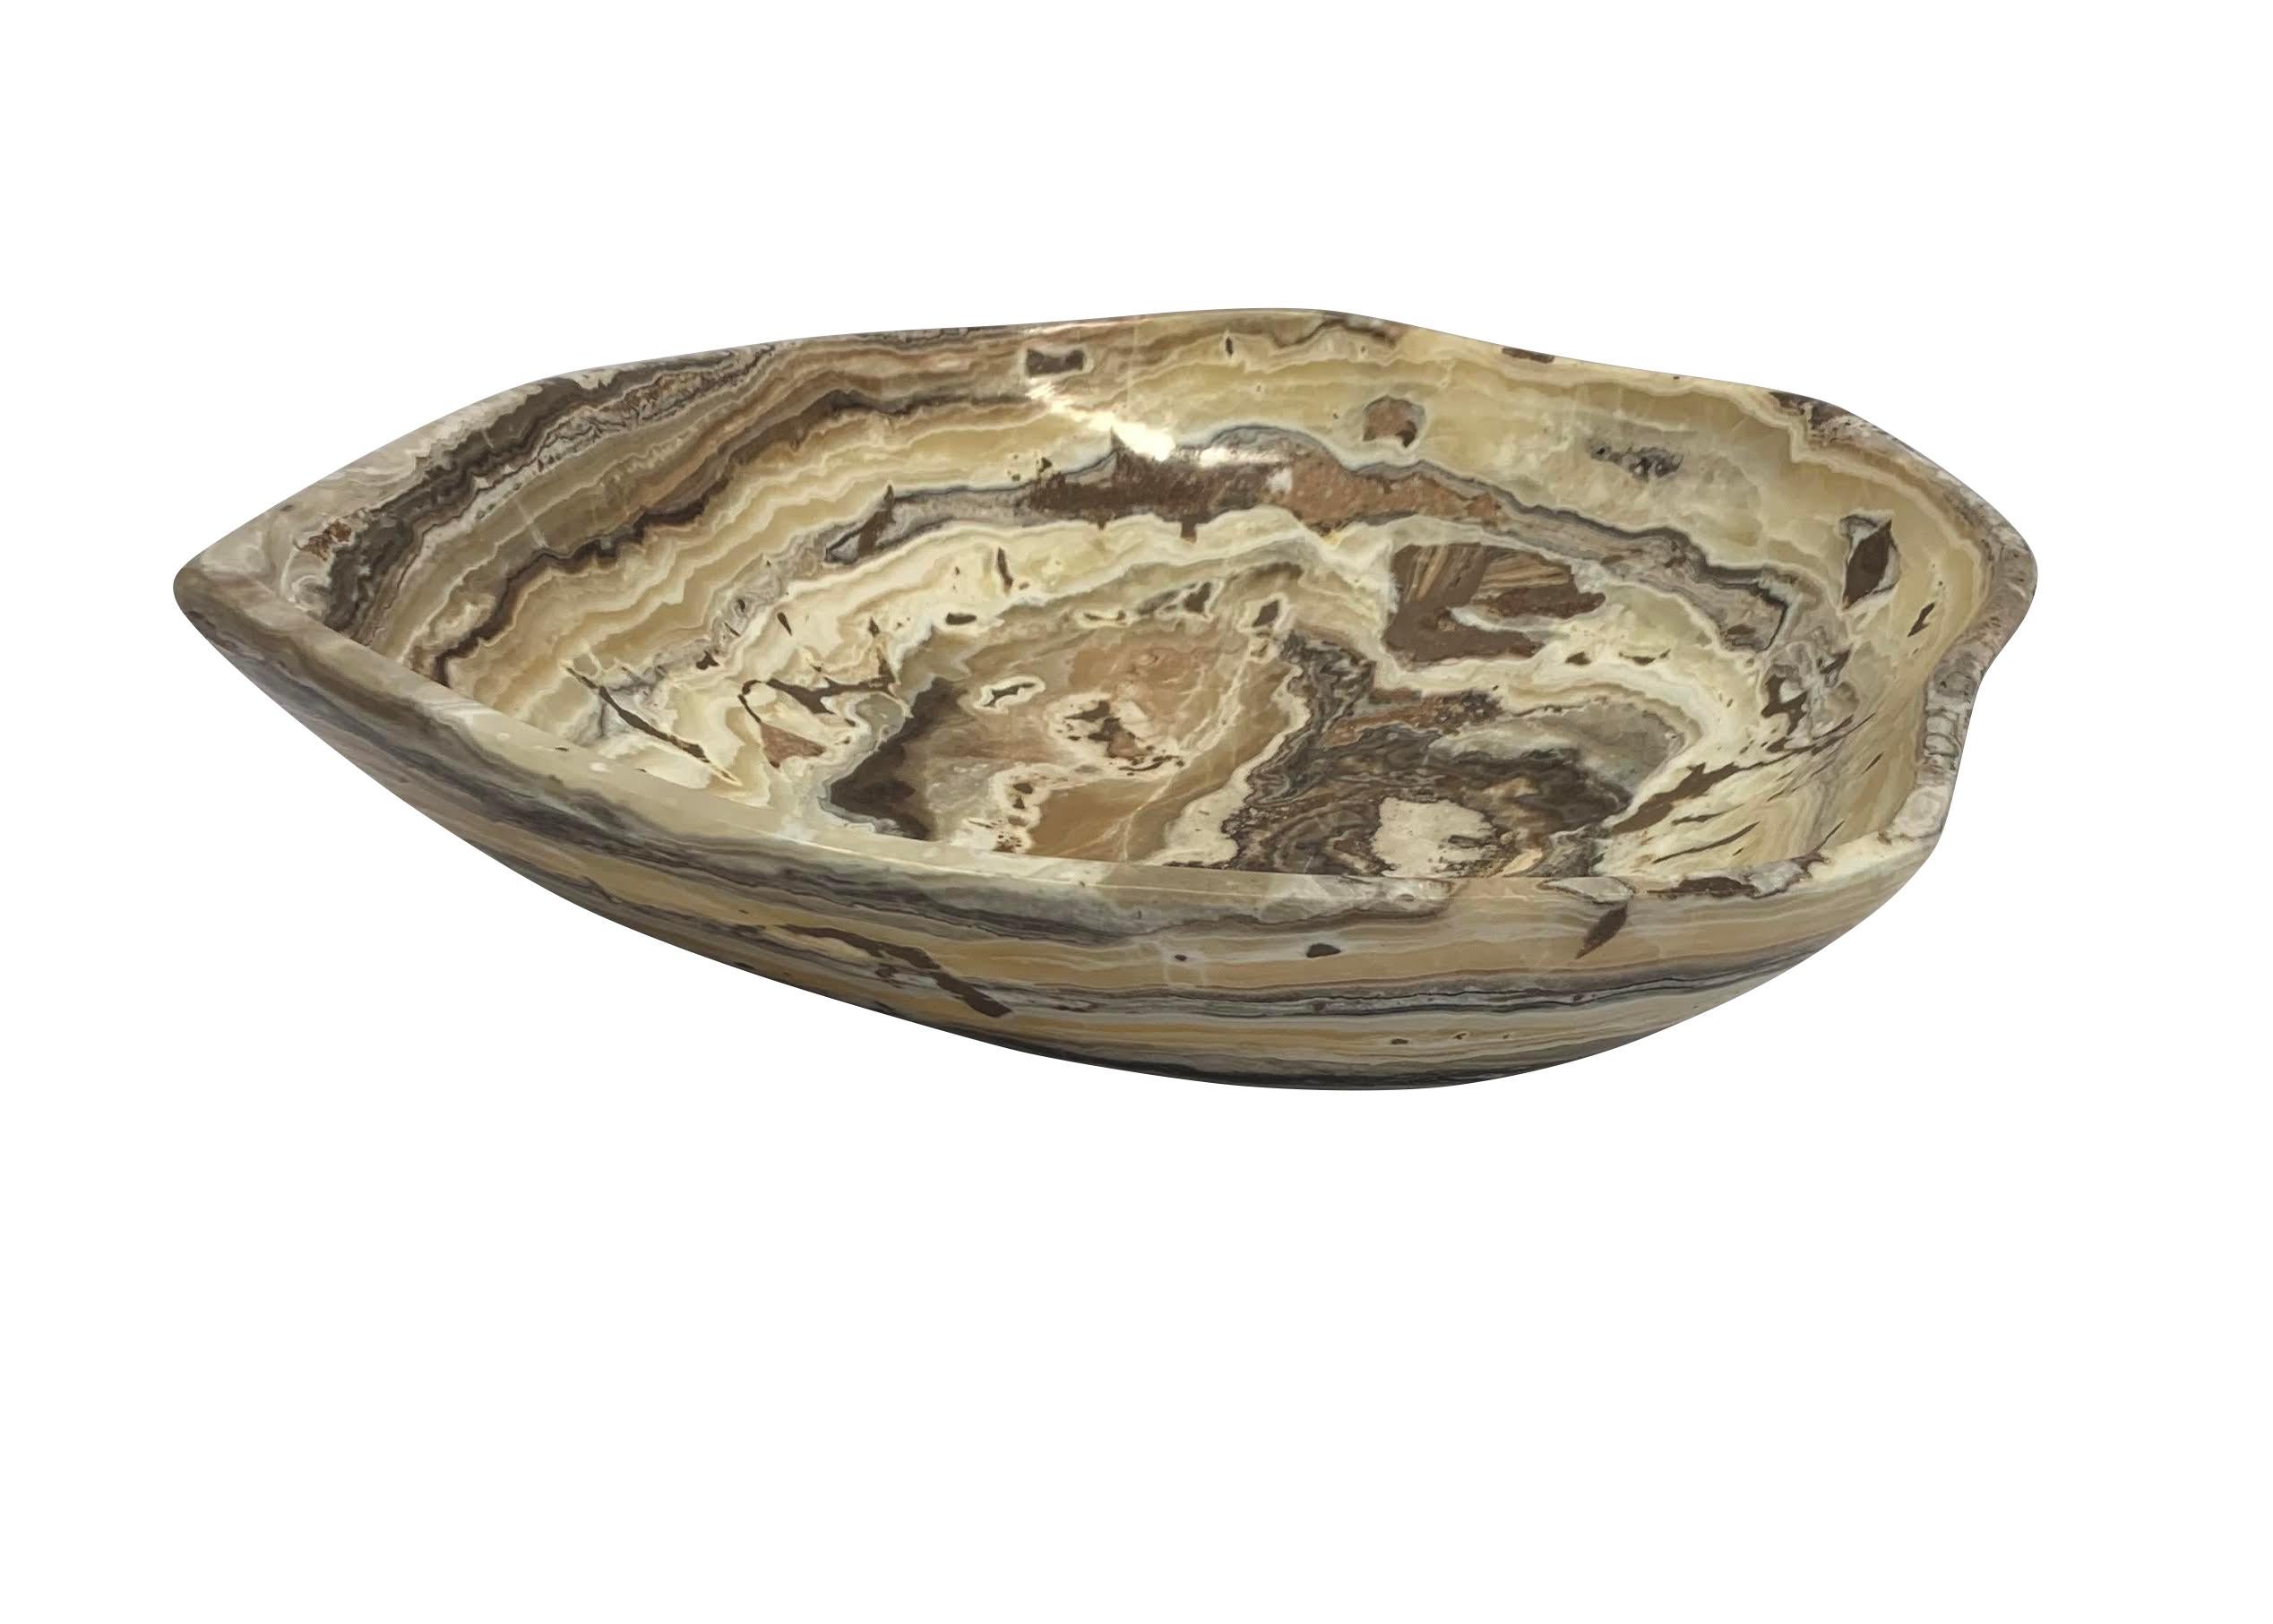 Contemporary Moroccan free form shaped onyx bowl.
Tan, cream and dark grey in color.
From a large collection of different shapes, sizes and colors.